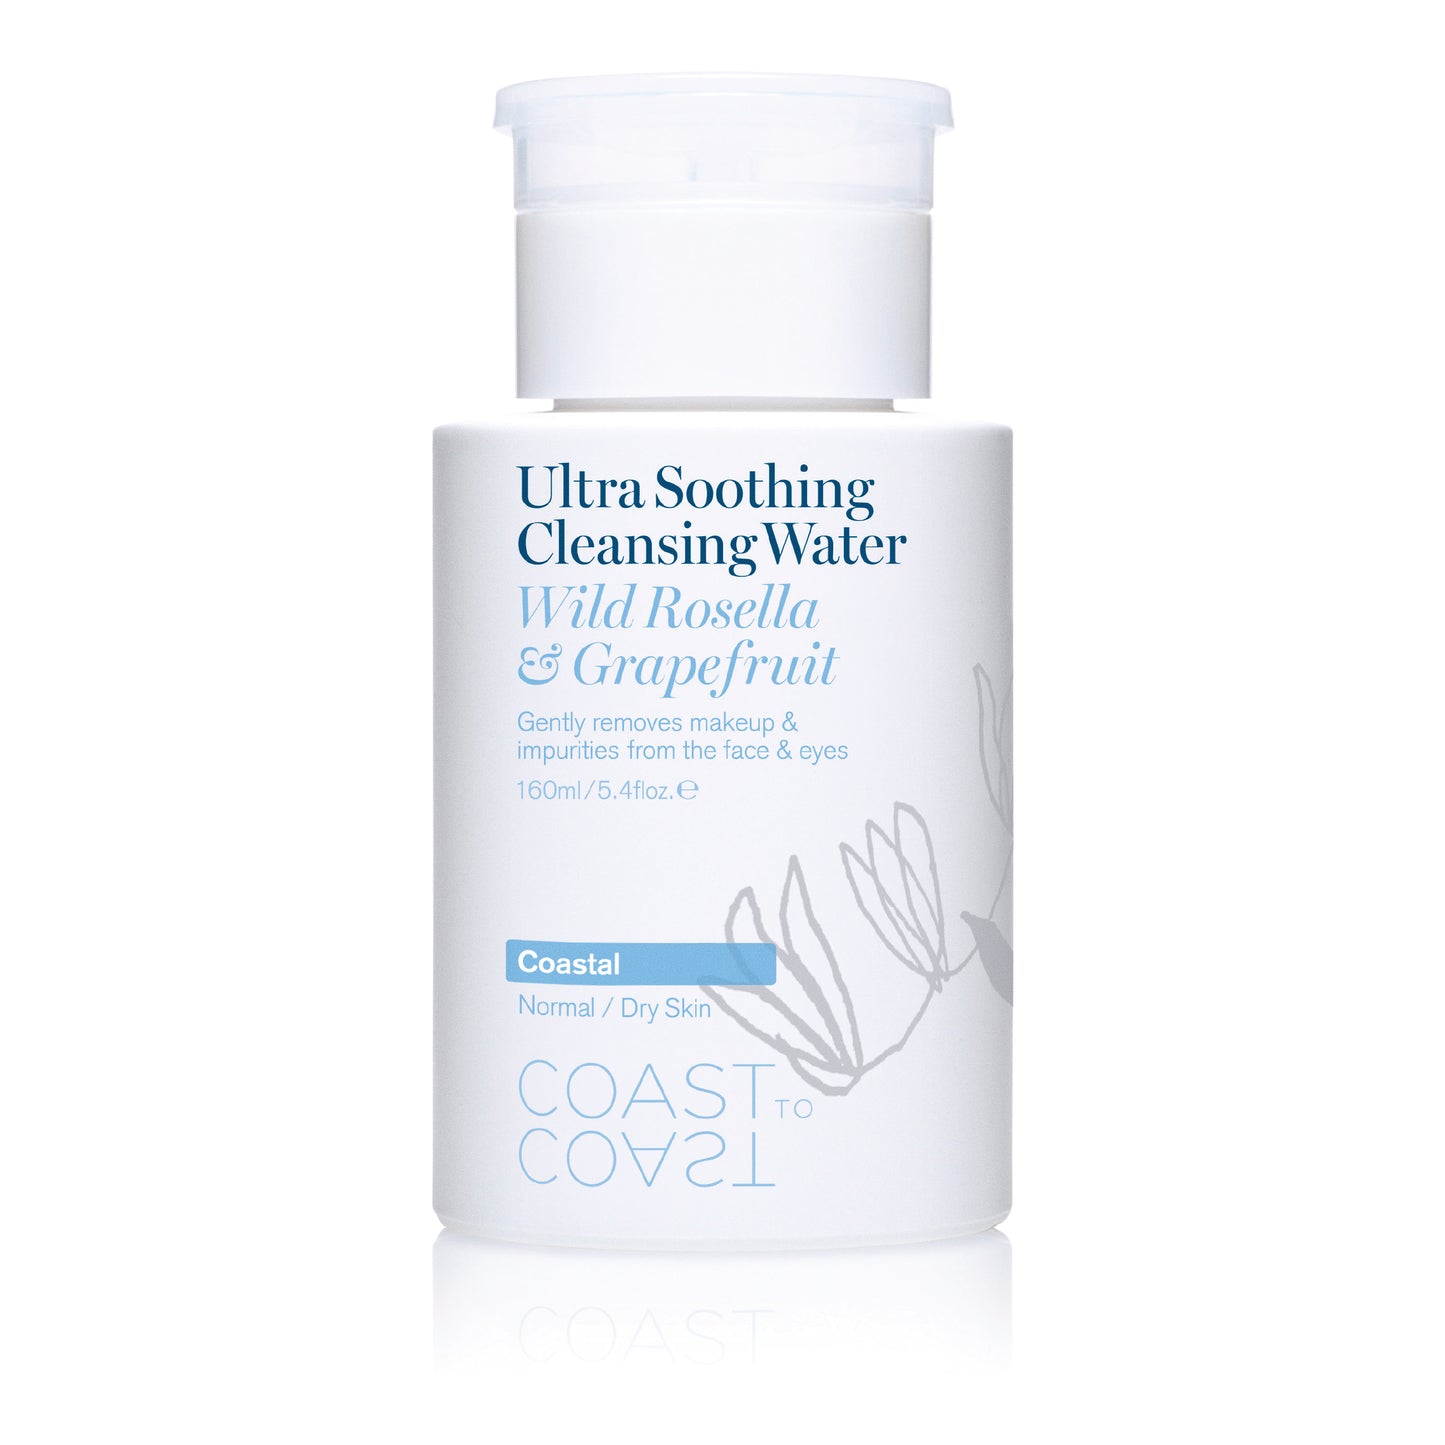 Ultra Soothing Cleansing Water